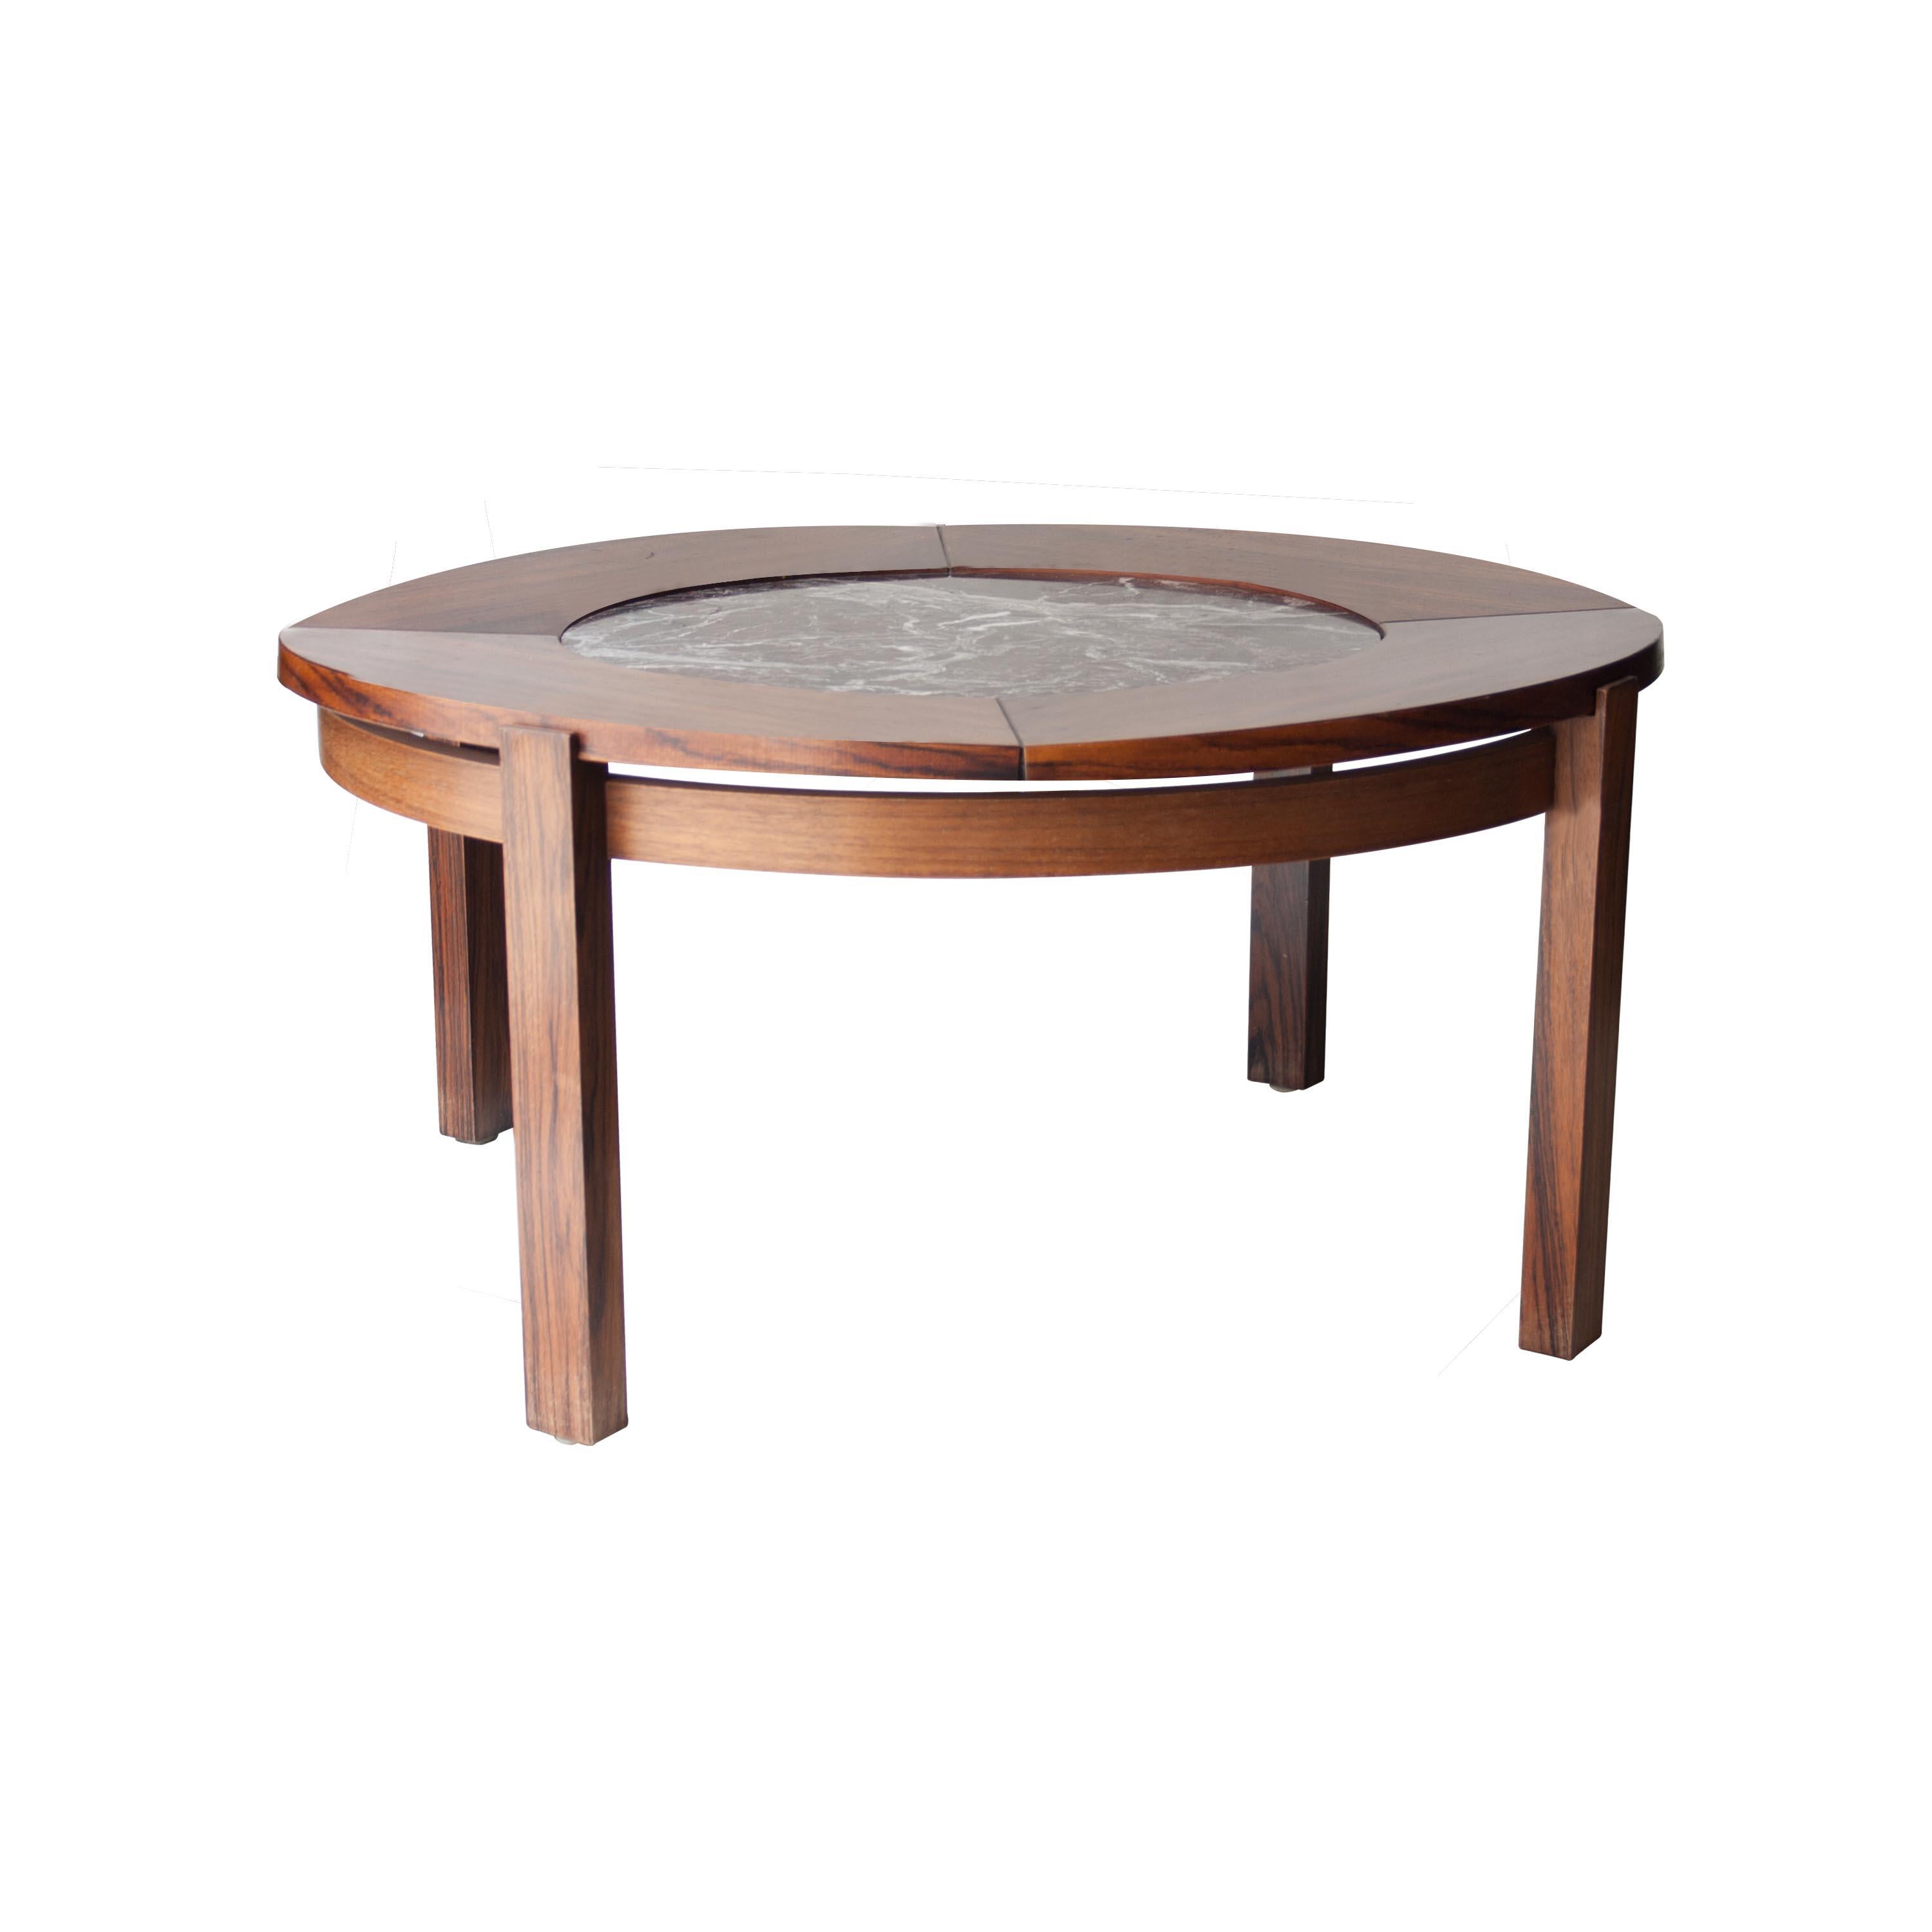 Coffee table in rounded shape. Structure made of mahogany wood with marble centerpiece top.